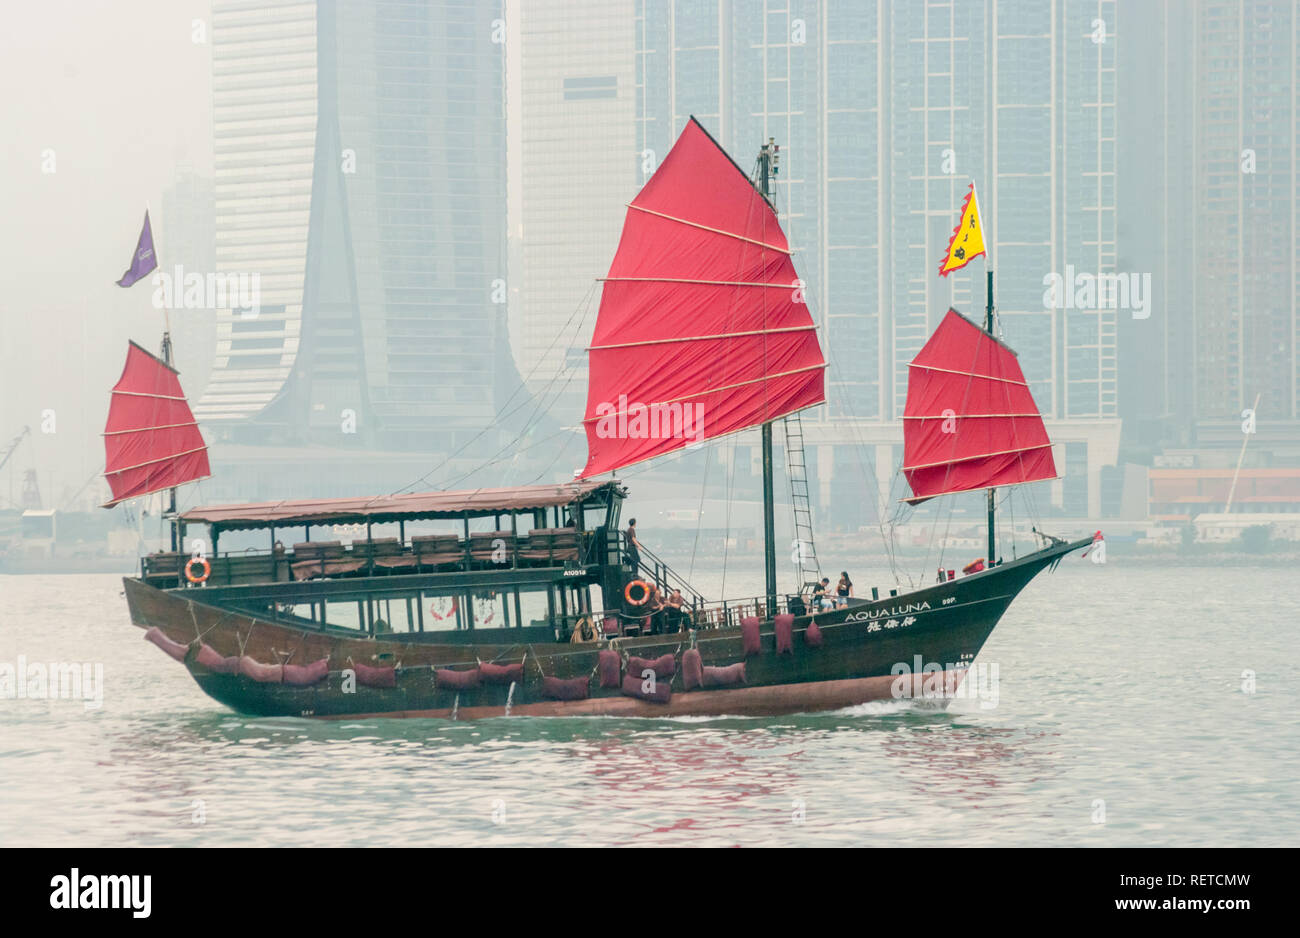 Sailing boat with red sails and yellow and purple flags, with people aboard, in hazy Hong Kong Harbour, China. Stock Photo